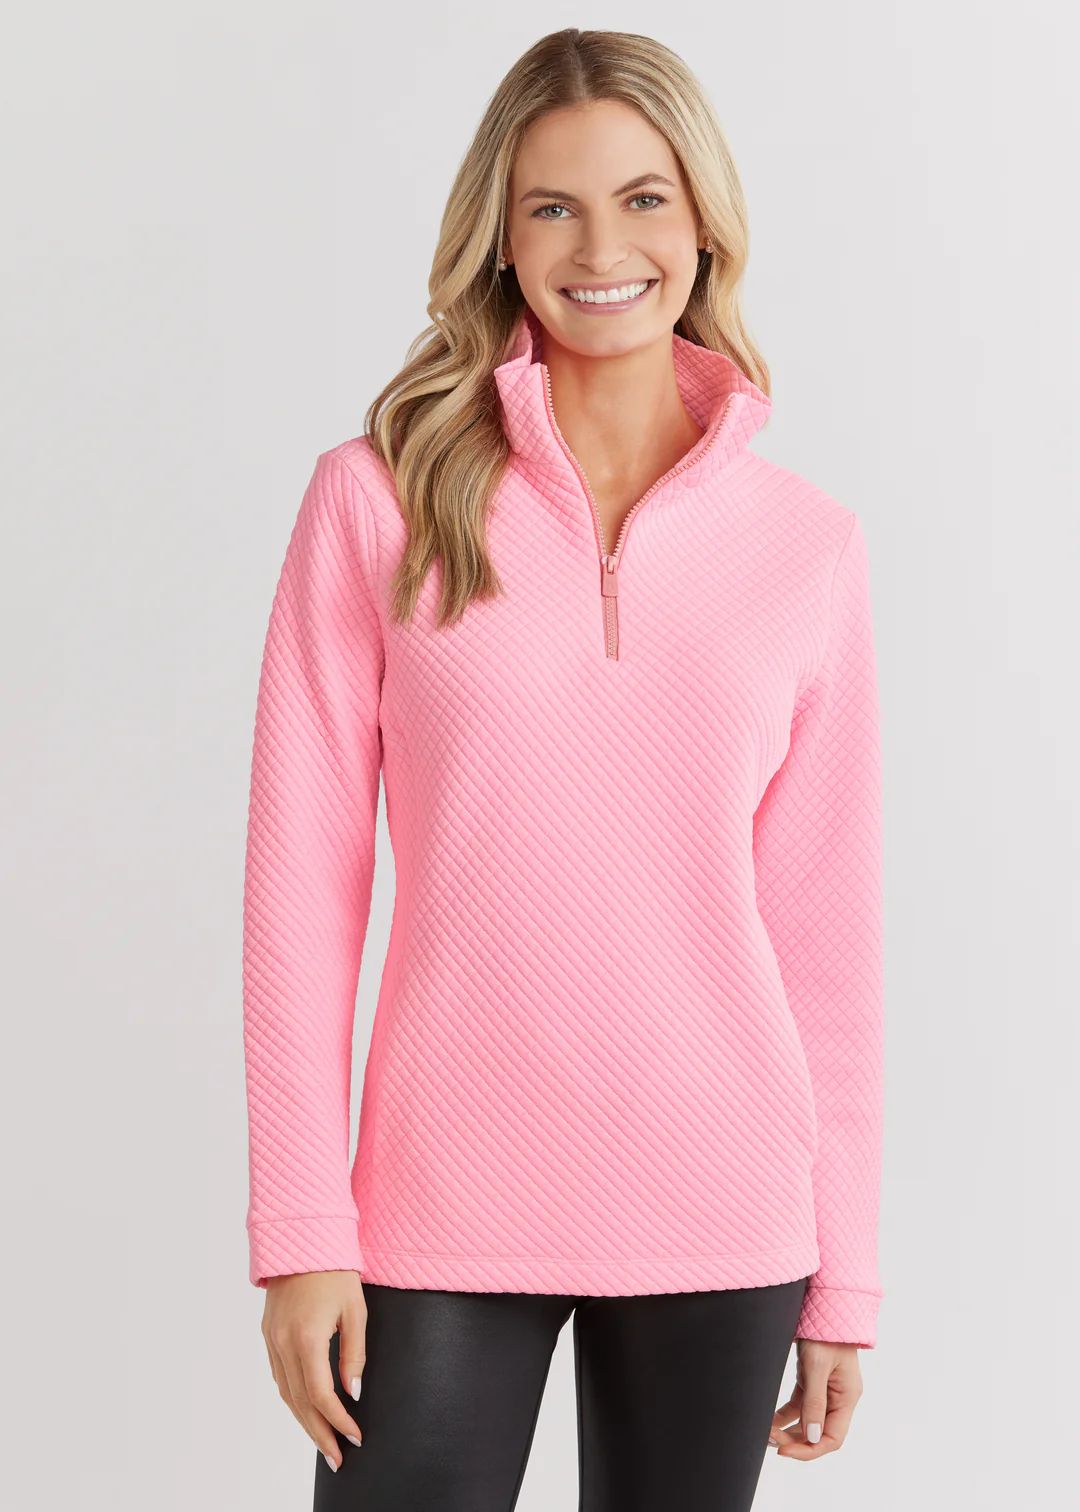 Pocomo Pullover in Waffle (Cotton Candy) | Dudley Stephens